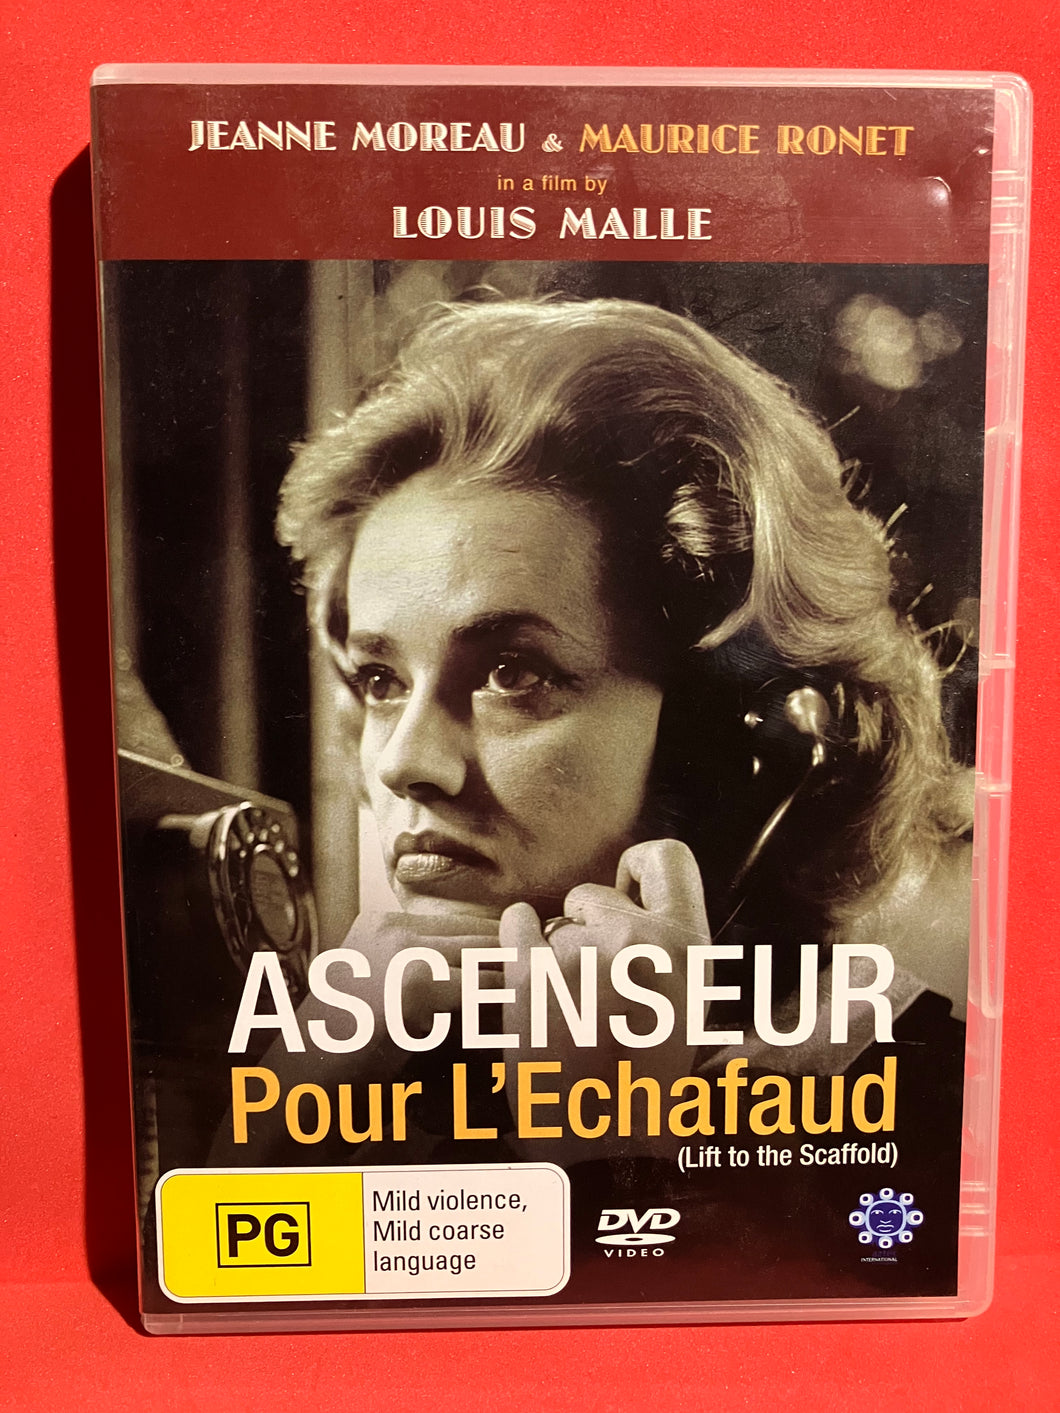 ASCENSEUR POUR L'ECHAFAUD LIFT TO THE SCAFFOLD - DVD (SECOND HAND)